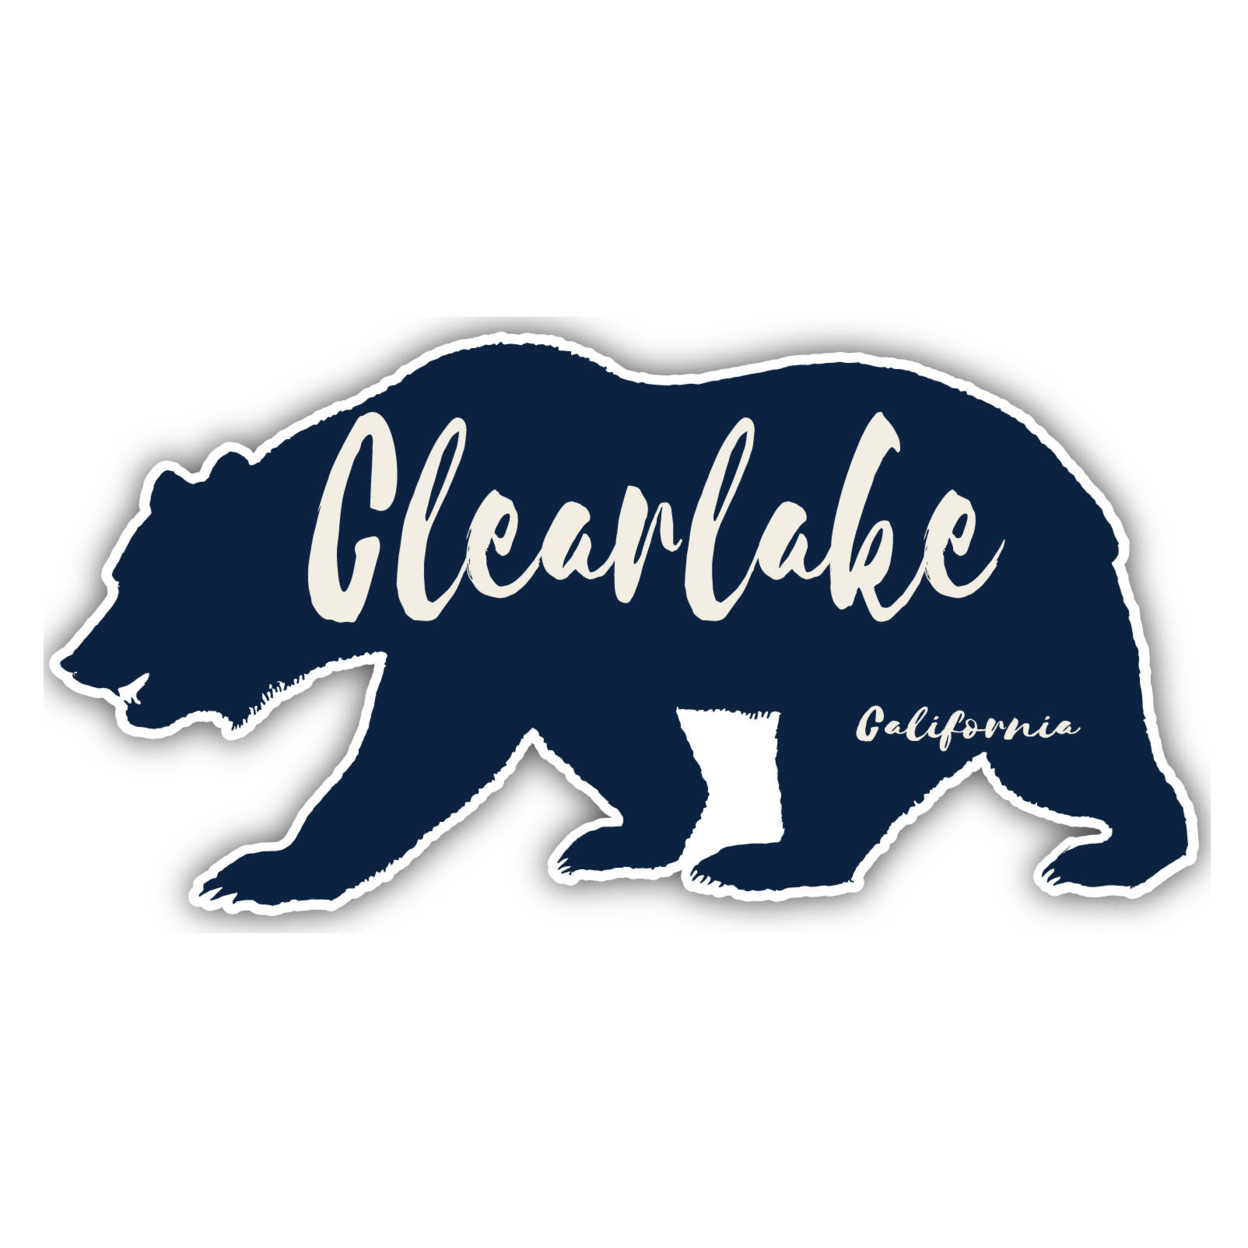 Clearlake California Souvenir Decorative Stickers (Choose Theme And Size) - 4-Pack, 6-Inch, Camp Life